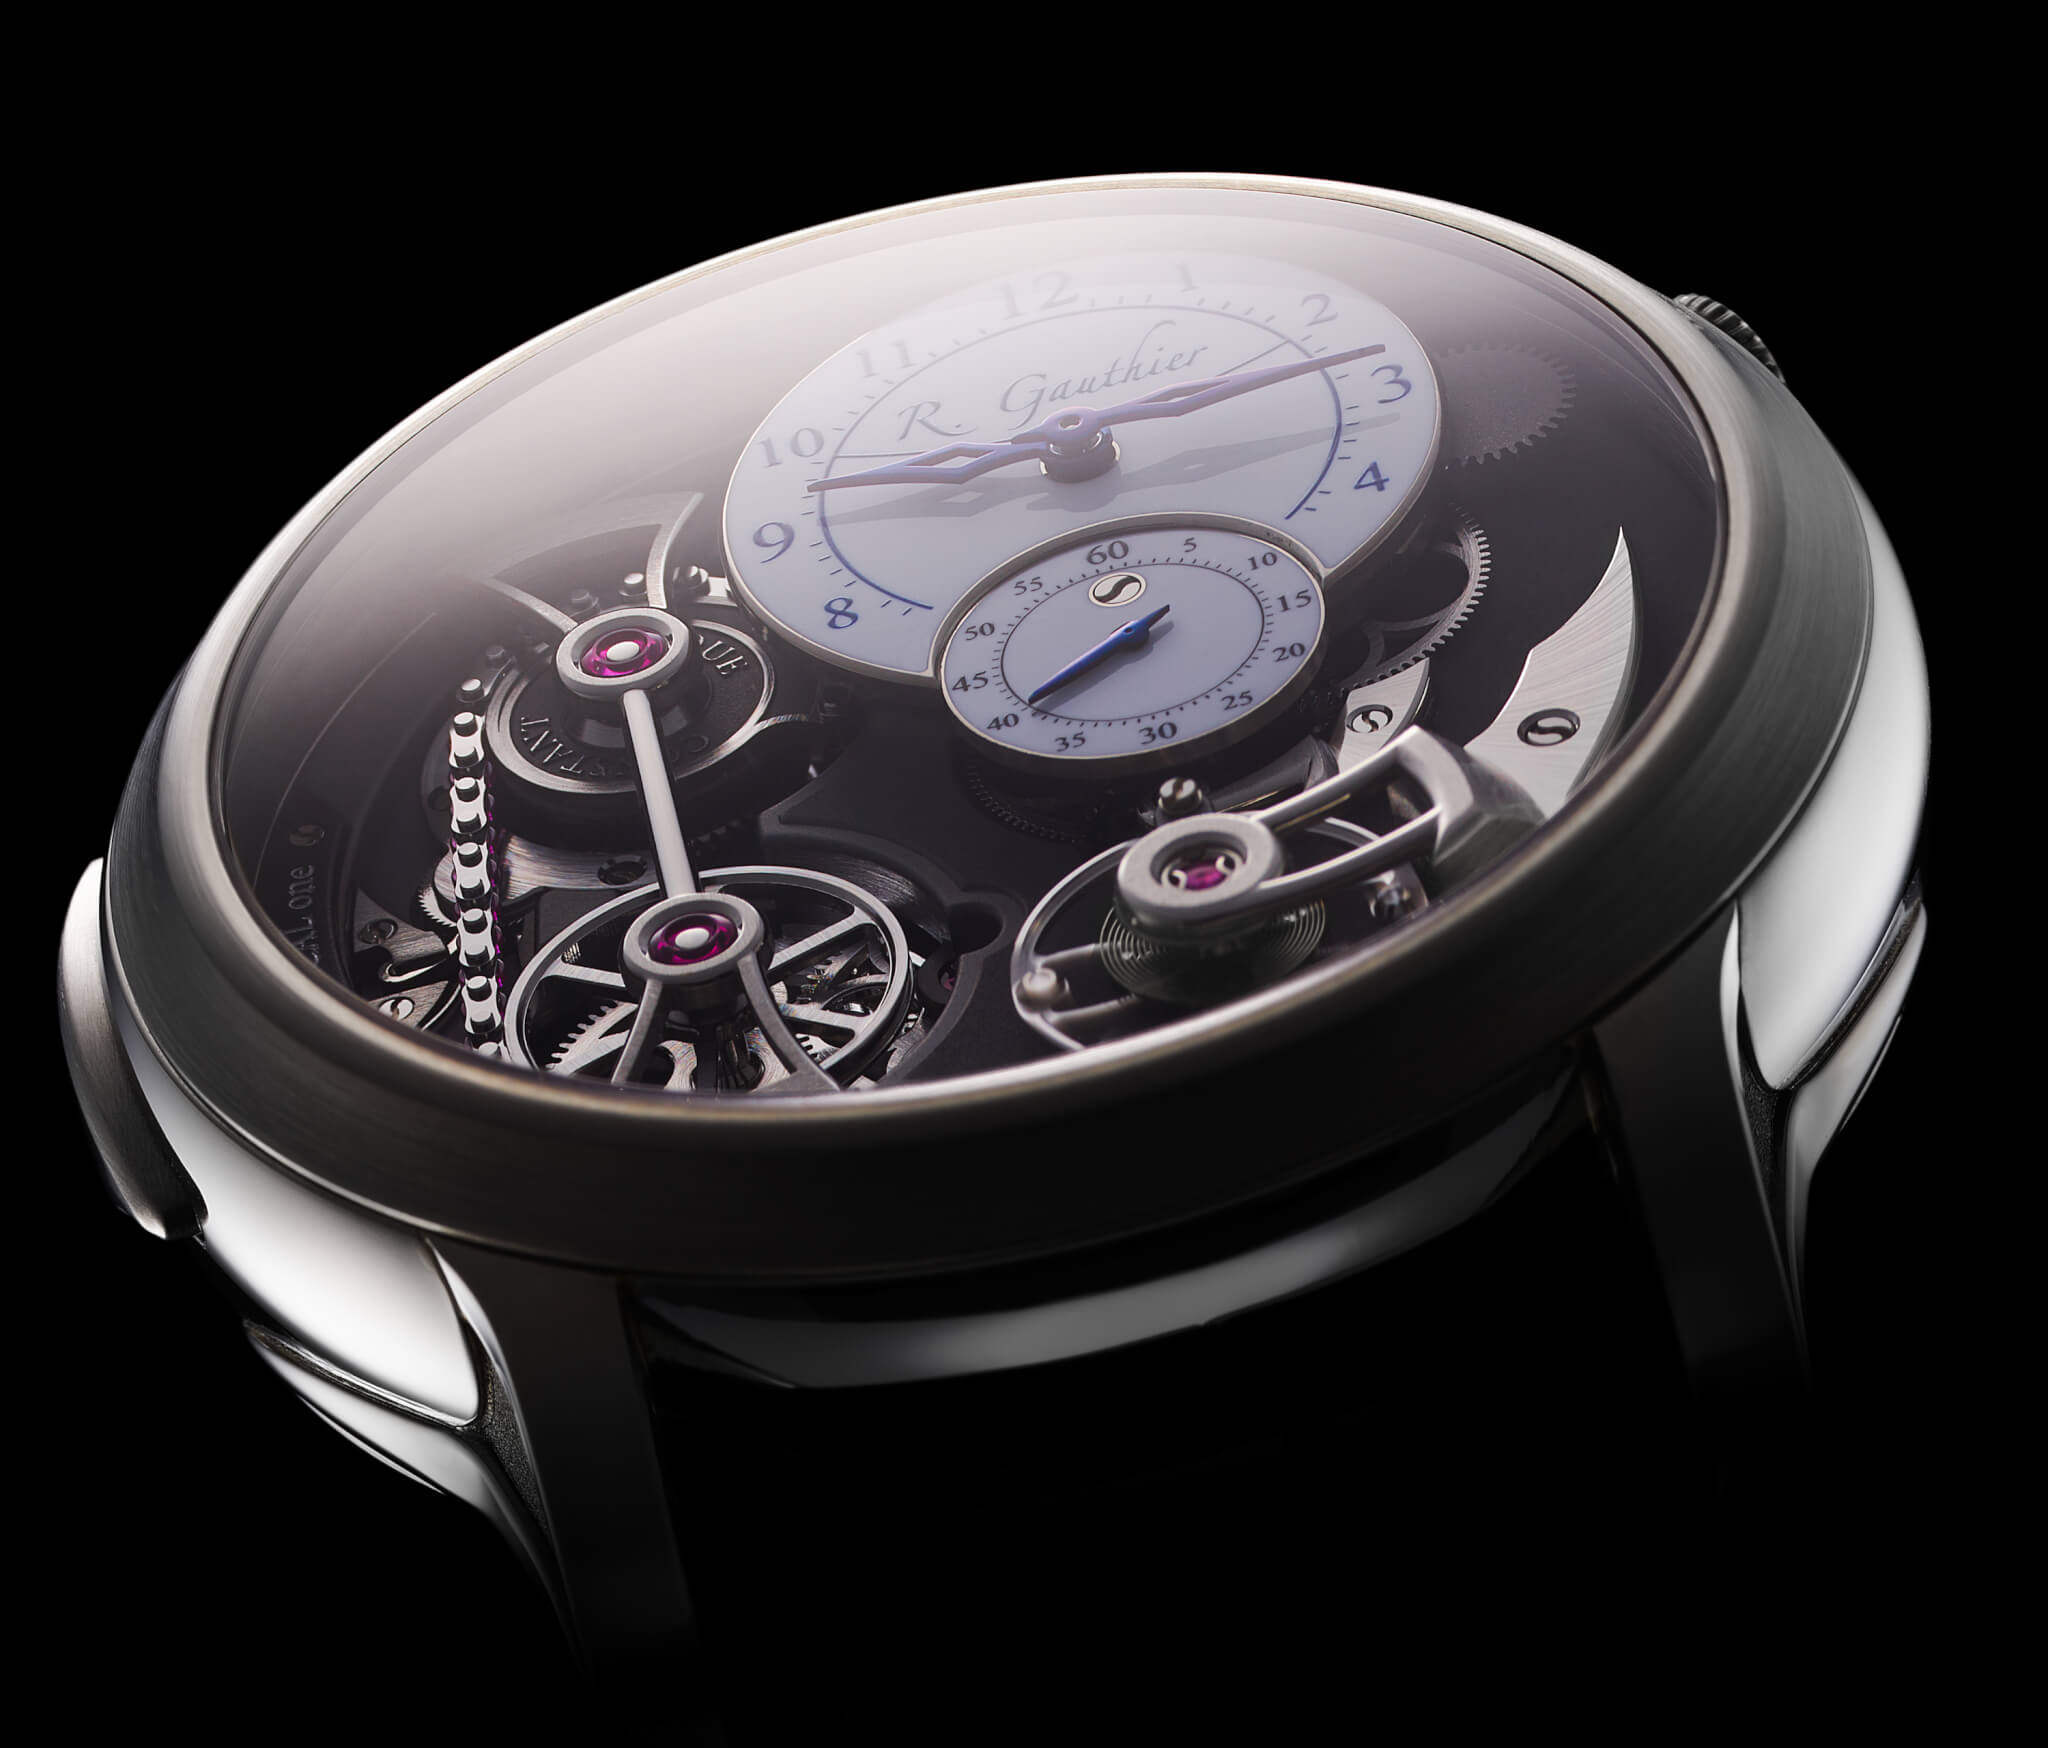 A close look at the white fired-enamel dials on this Romain Gauthier Logical One in natural titanium